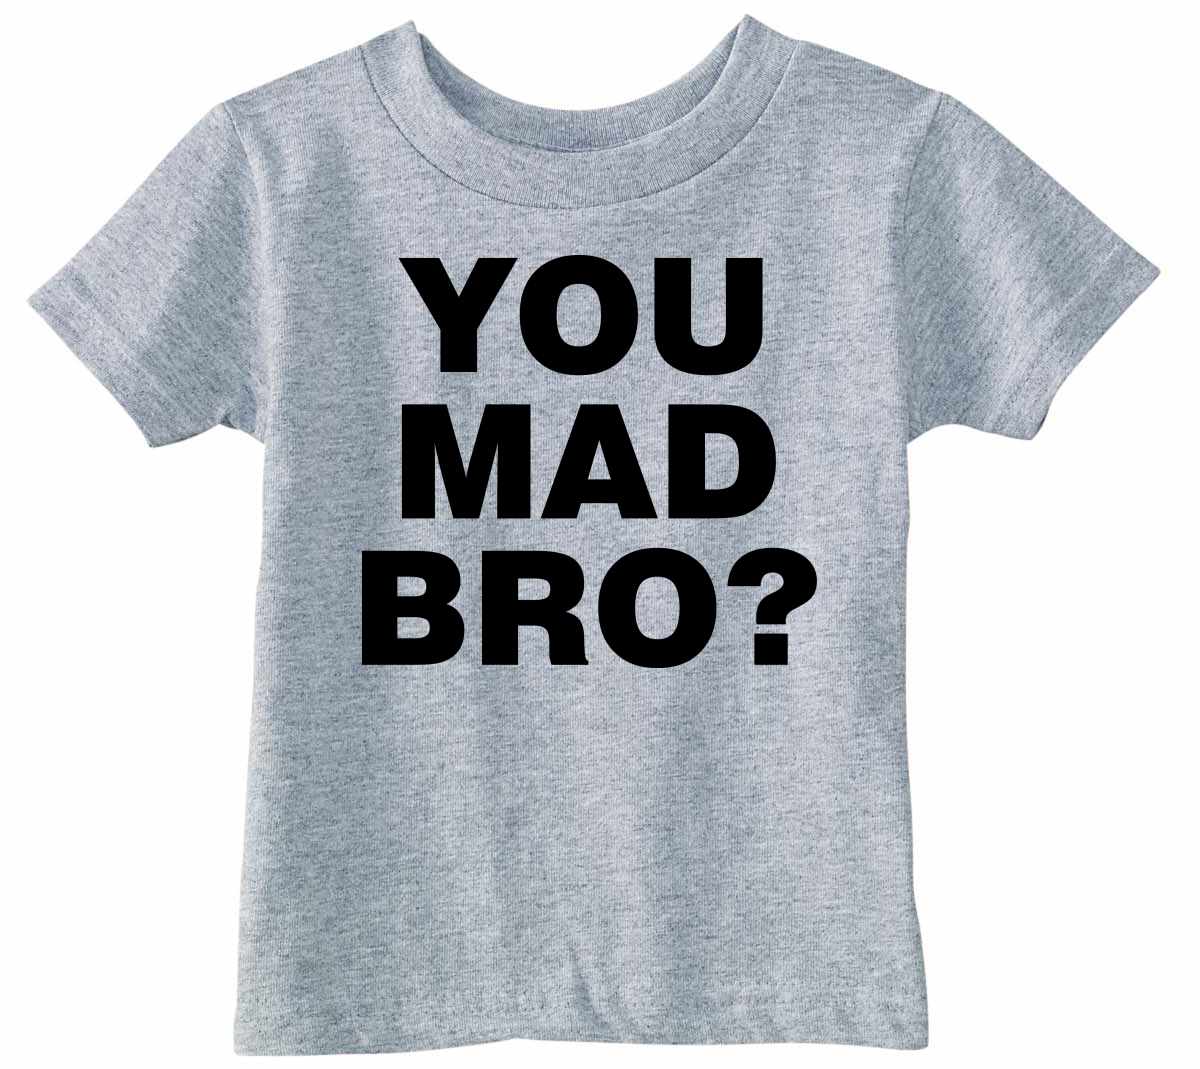 YOU MAD BRO? Infant/Toddler 